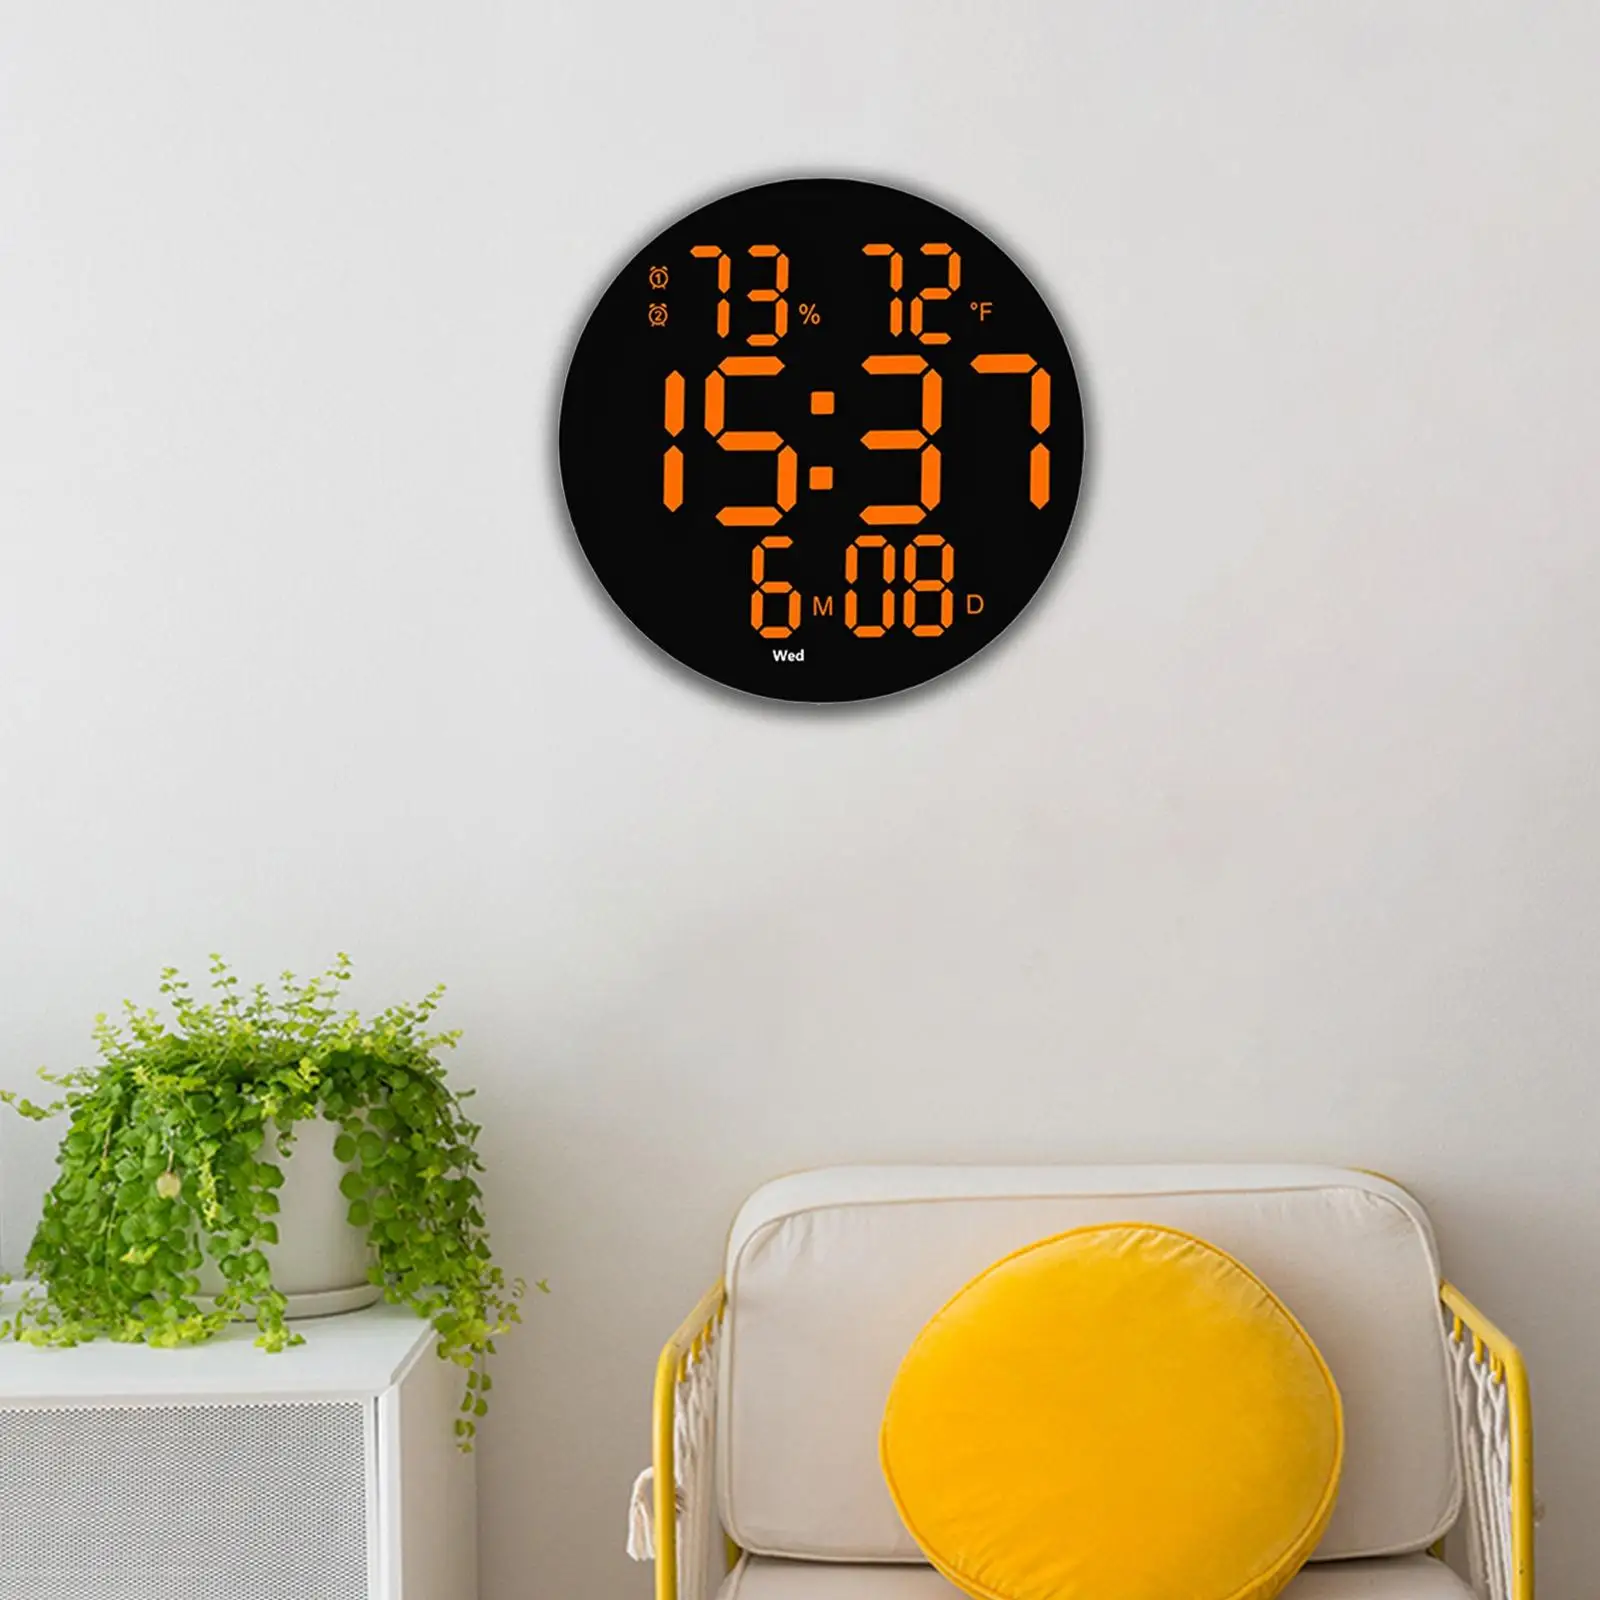 Non Ticking Wall Clock Adjustable Brightness USB Powered Clock Temperature and Humidity Display for Living Room Bedroom Kitchen